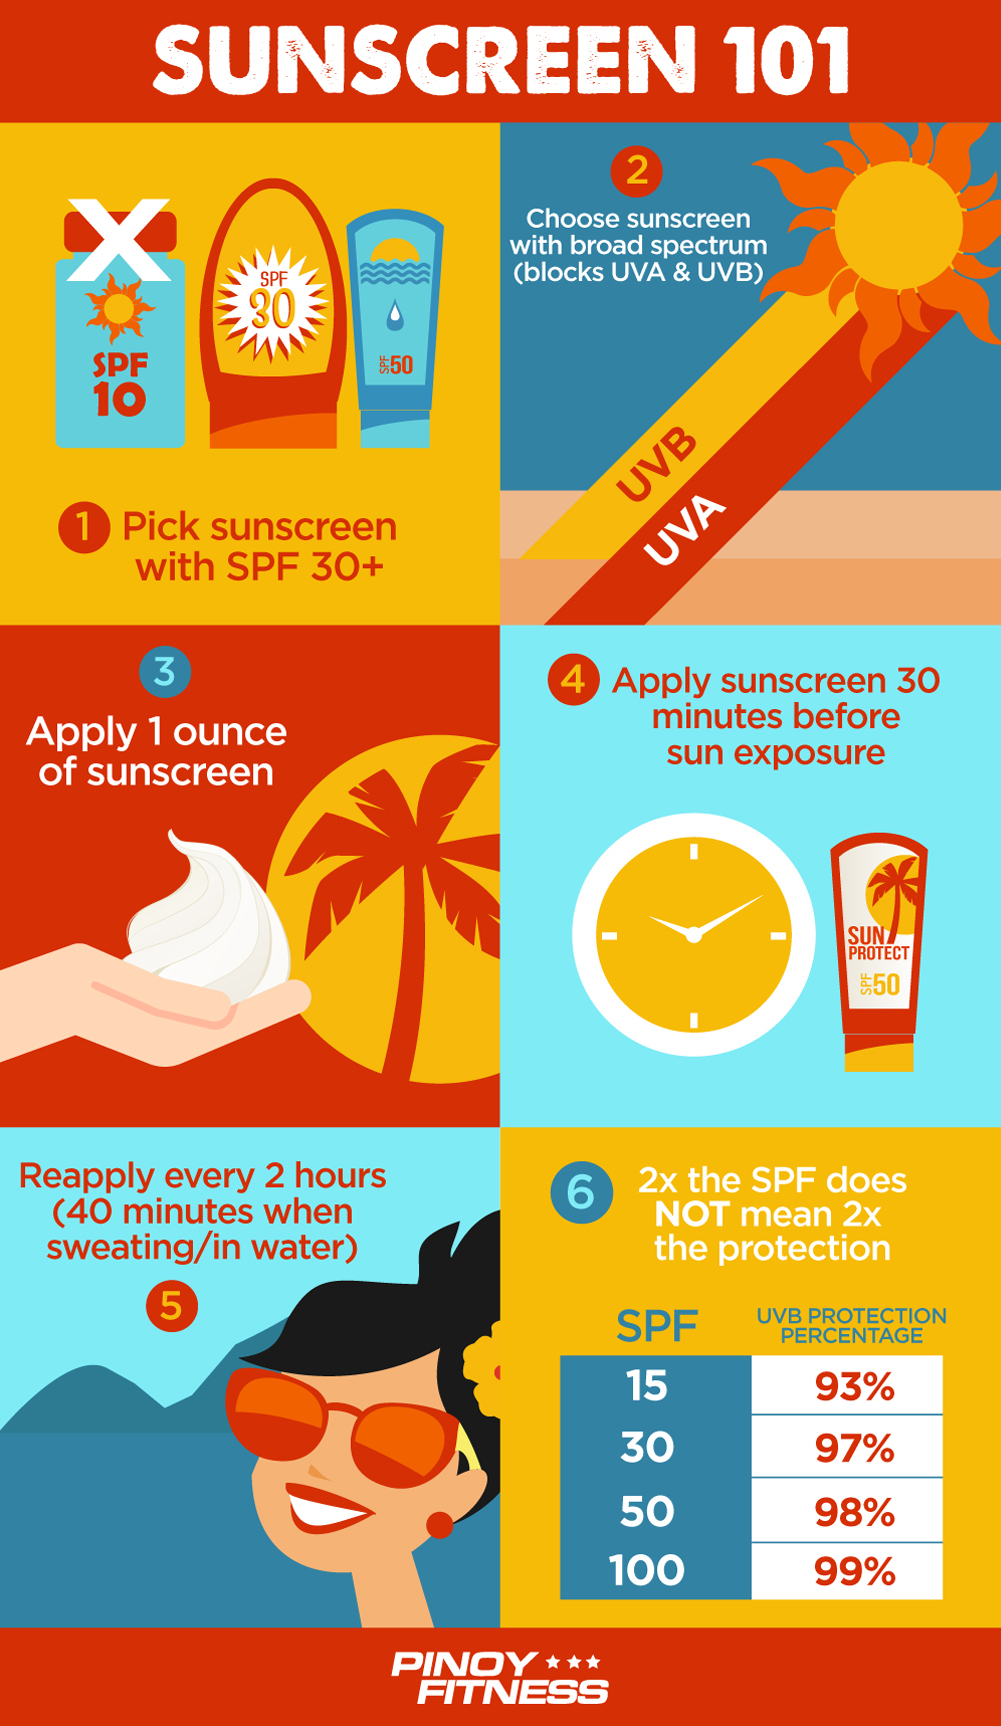 Sunscreen 101 6 Tips You Should Know This Summer Pinoy Fitness